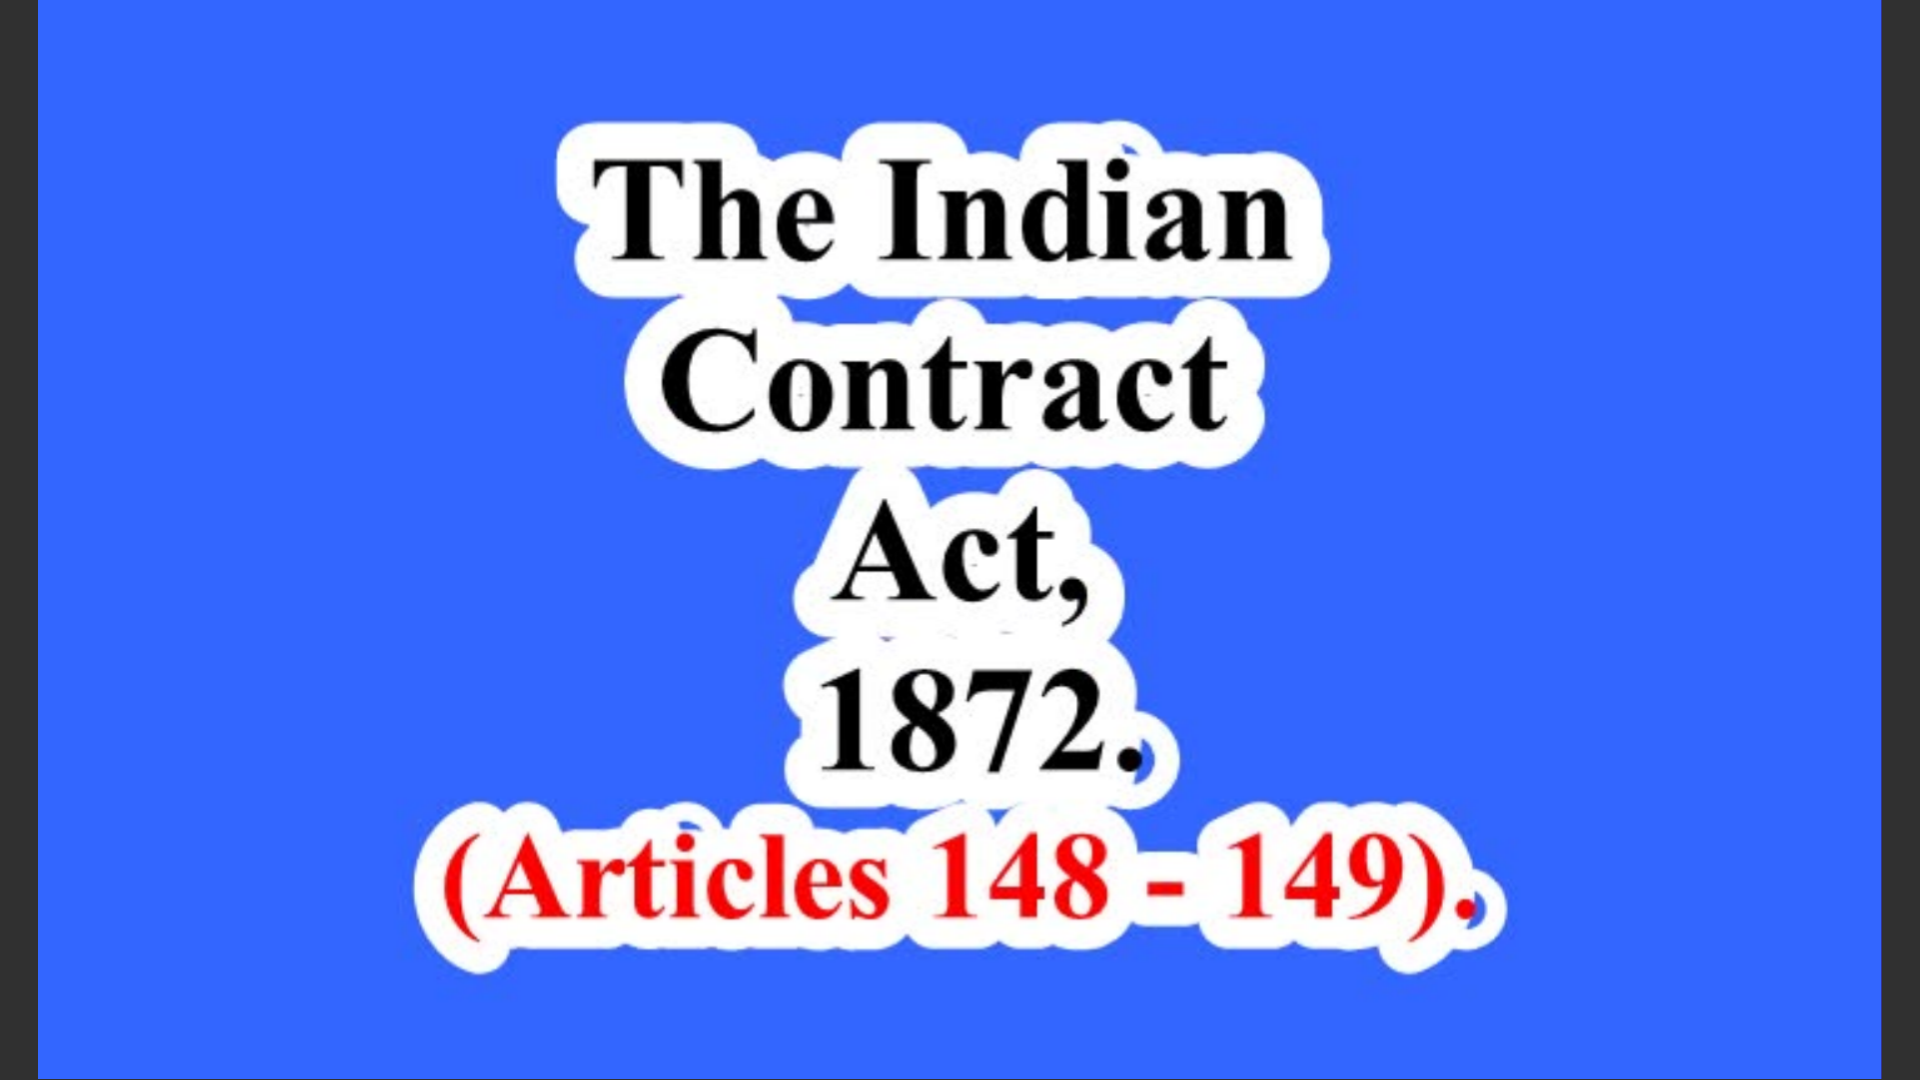 The Indian Contract Act, 1872. (Articles 148 – 149).